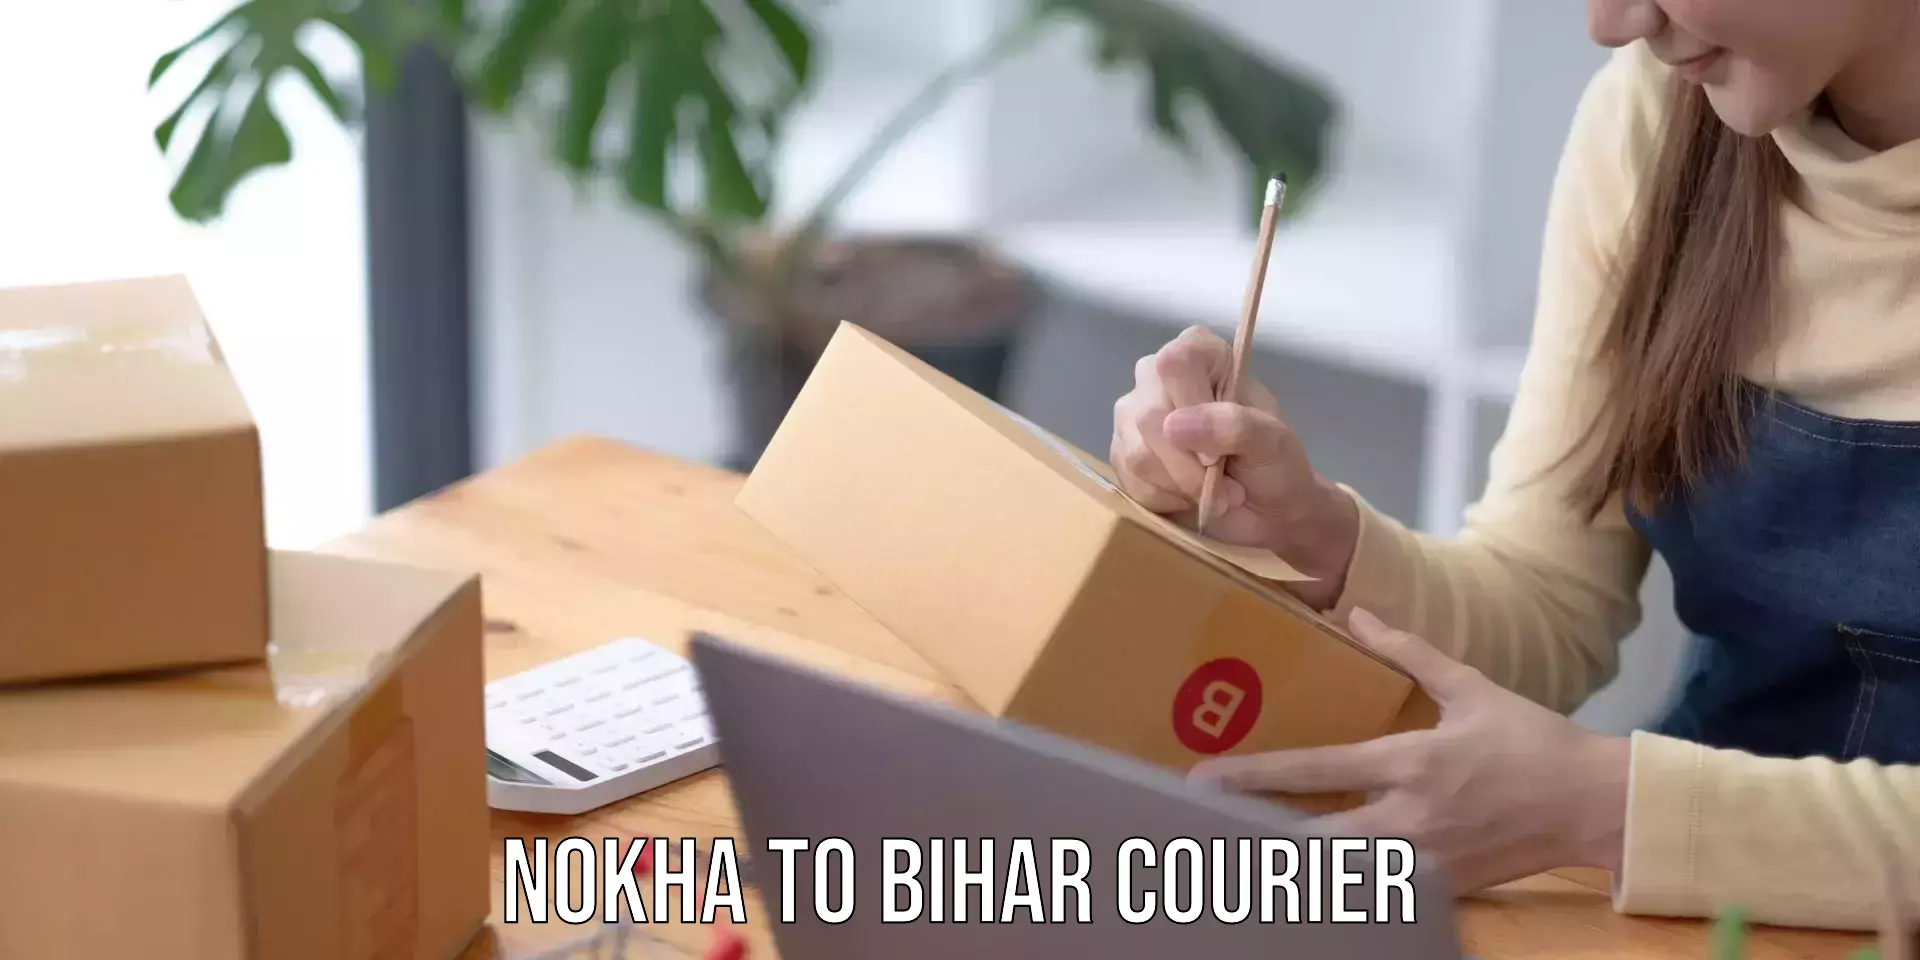 Local delivery service Nokha to Bihar